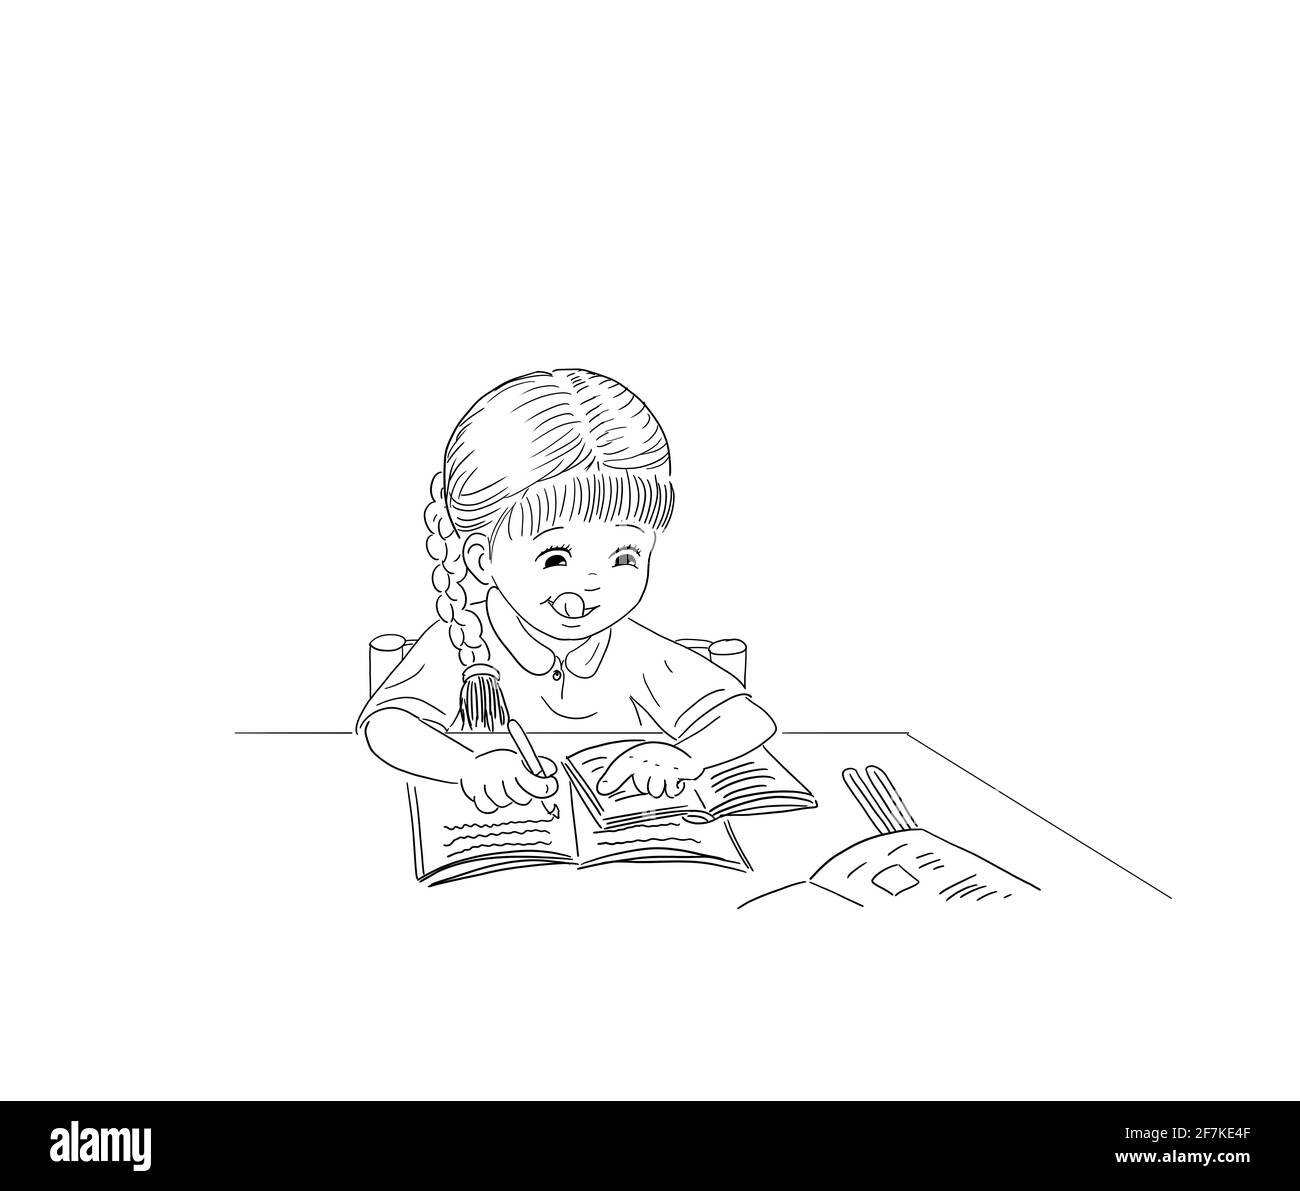 Girl schoolgirl child with pigtail sits at the table exercise books education learning material school homework home schooling learn write schoolwork Stock Photo